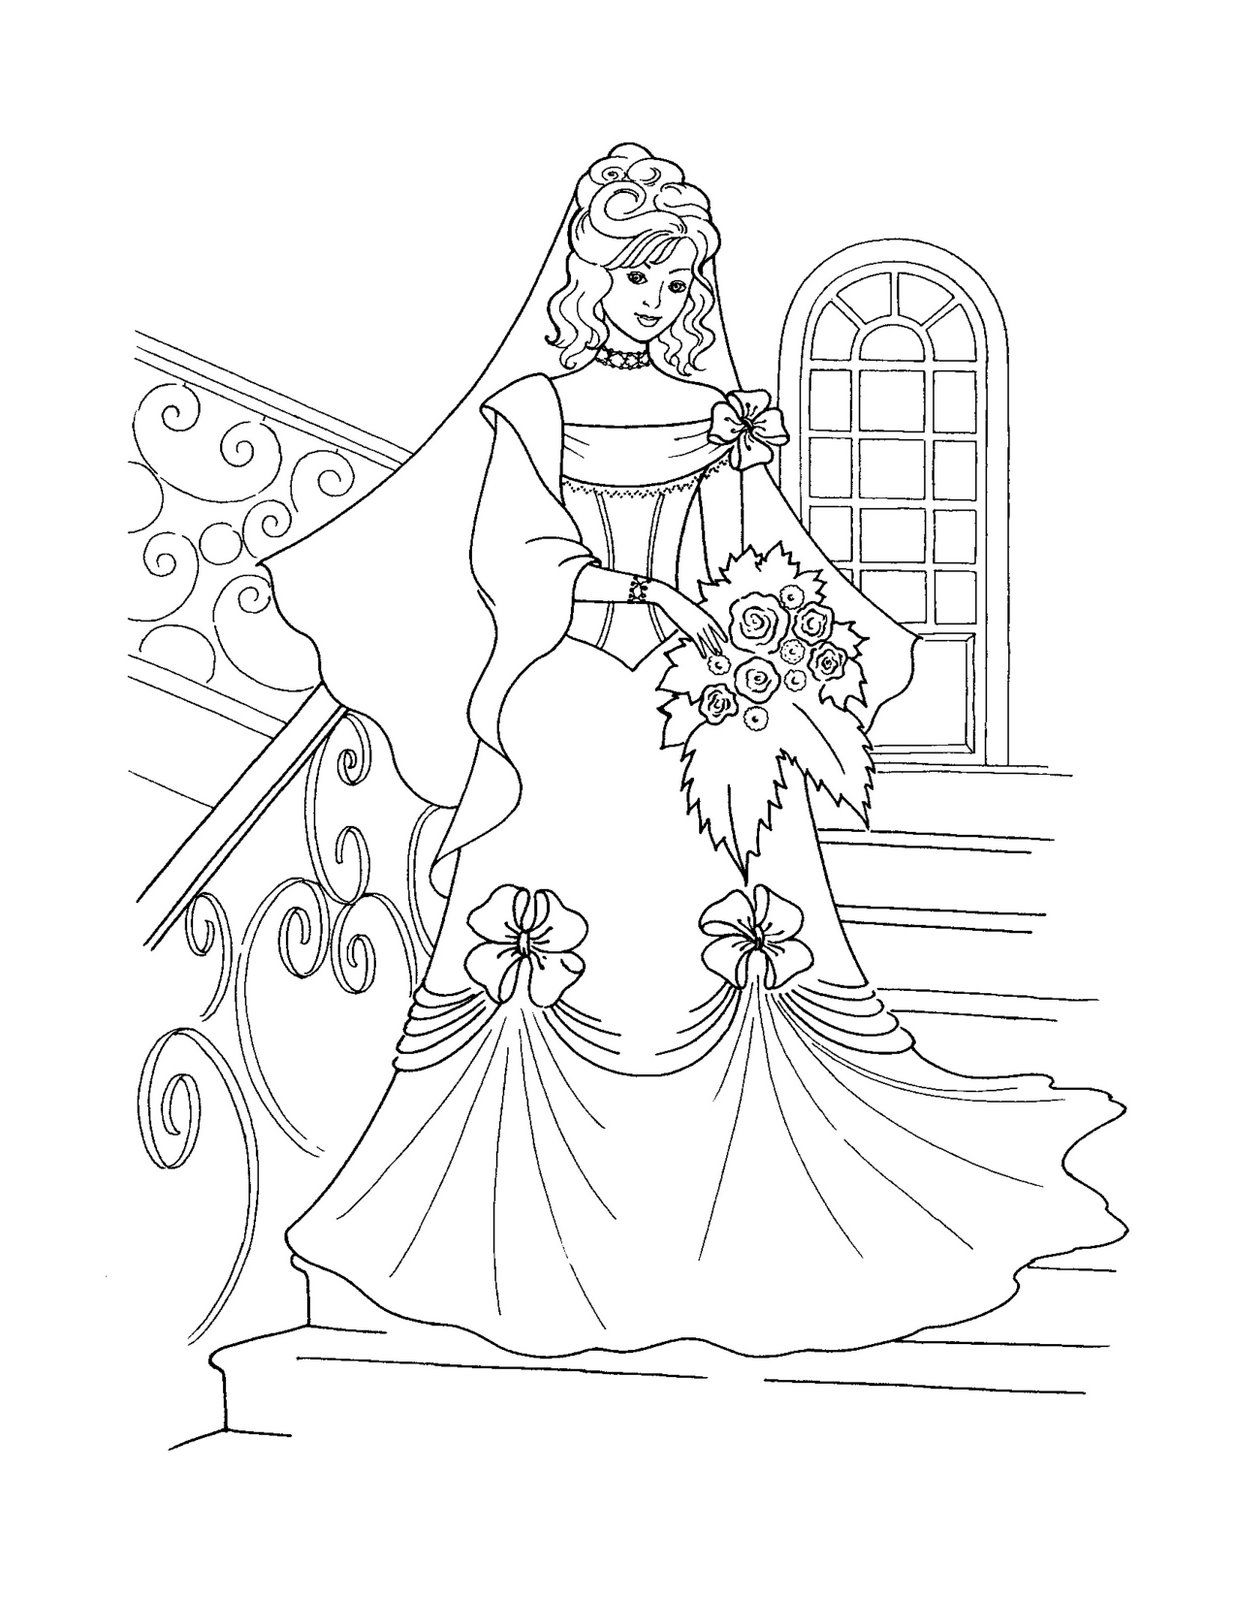 Christmas Coloring Pages Disney Princess   Coloring Page ...